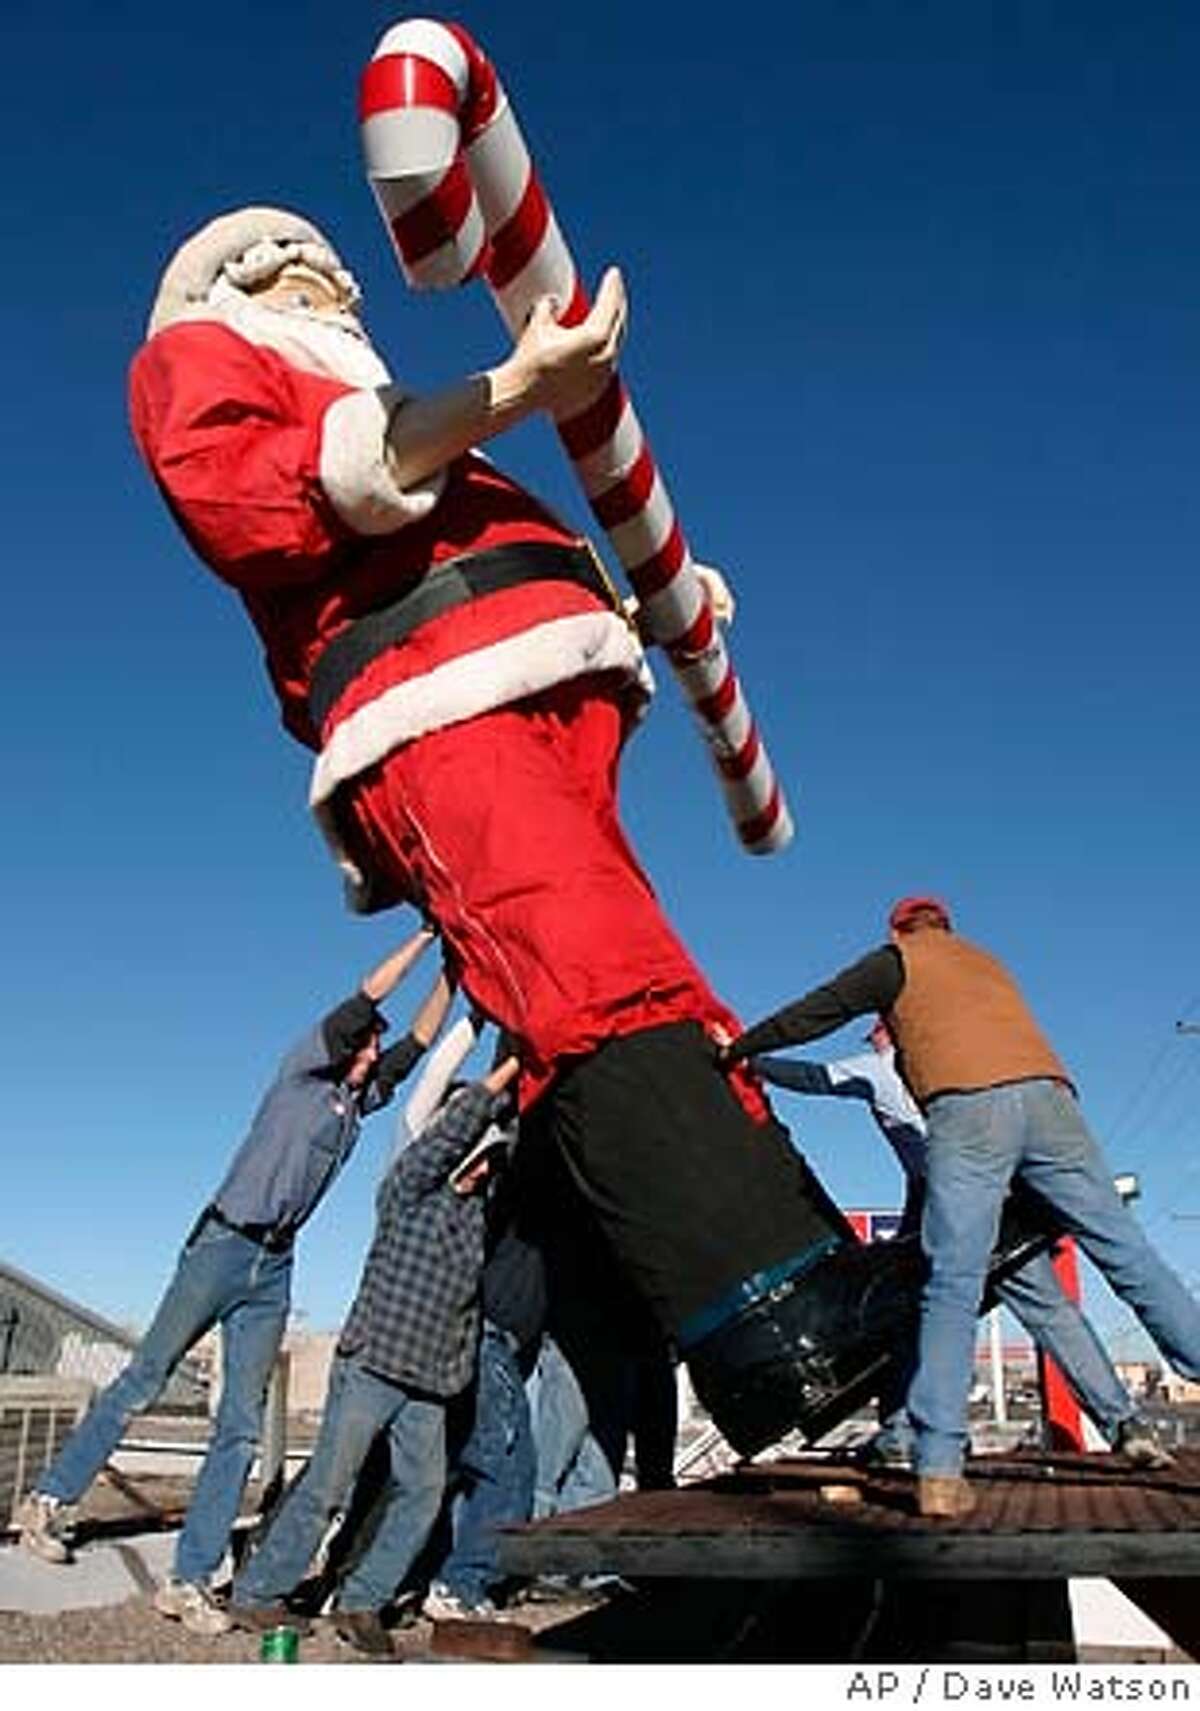 Many Czechs resent the imposition of Santa Claus into their Christmas tradition. Associated Press photo by Dave Watson